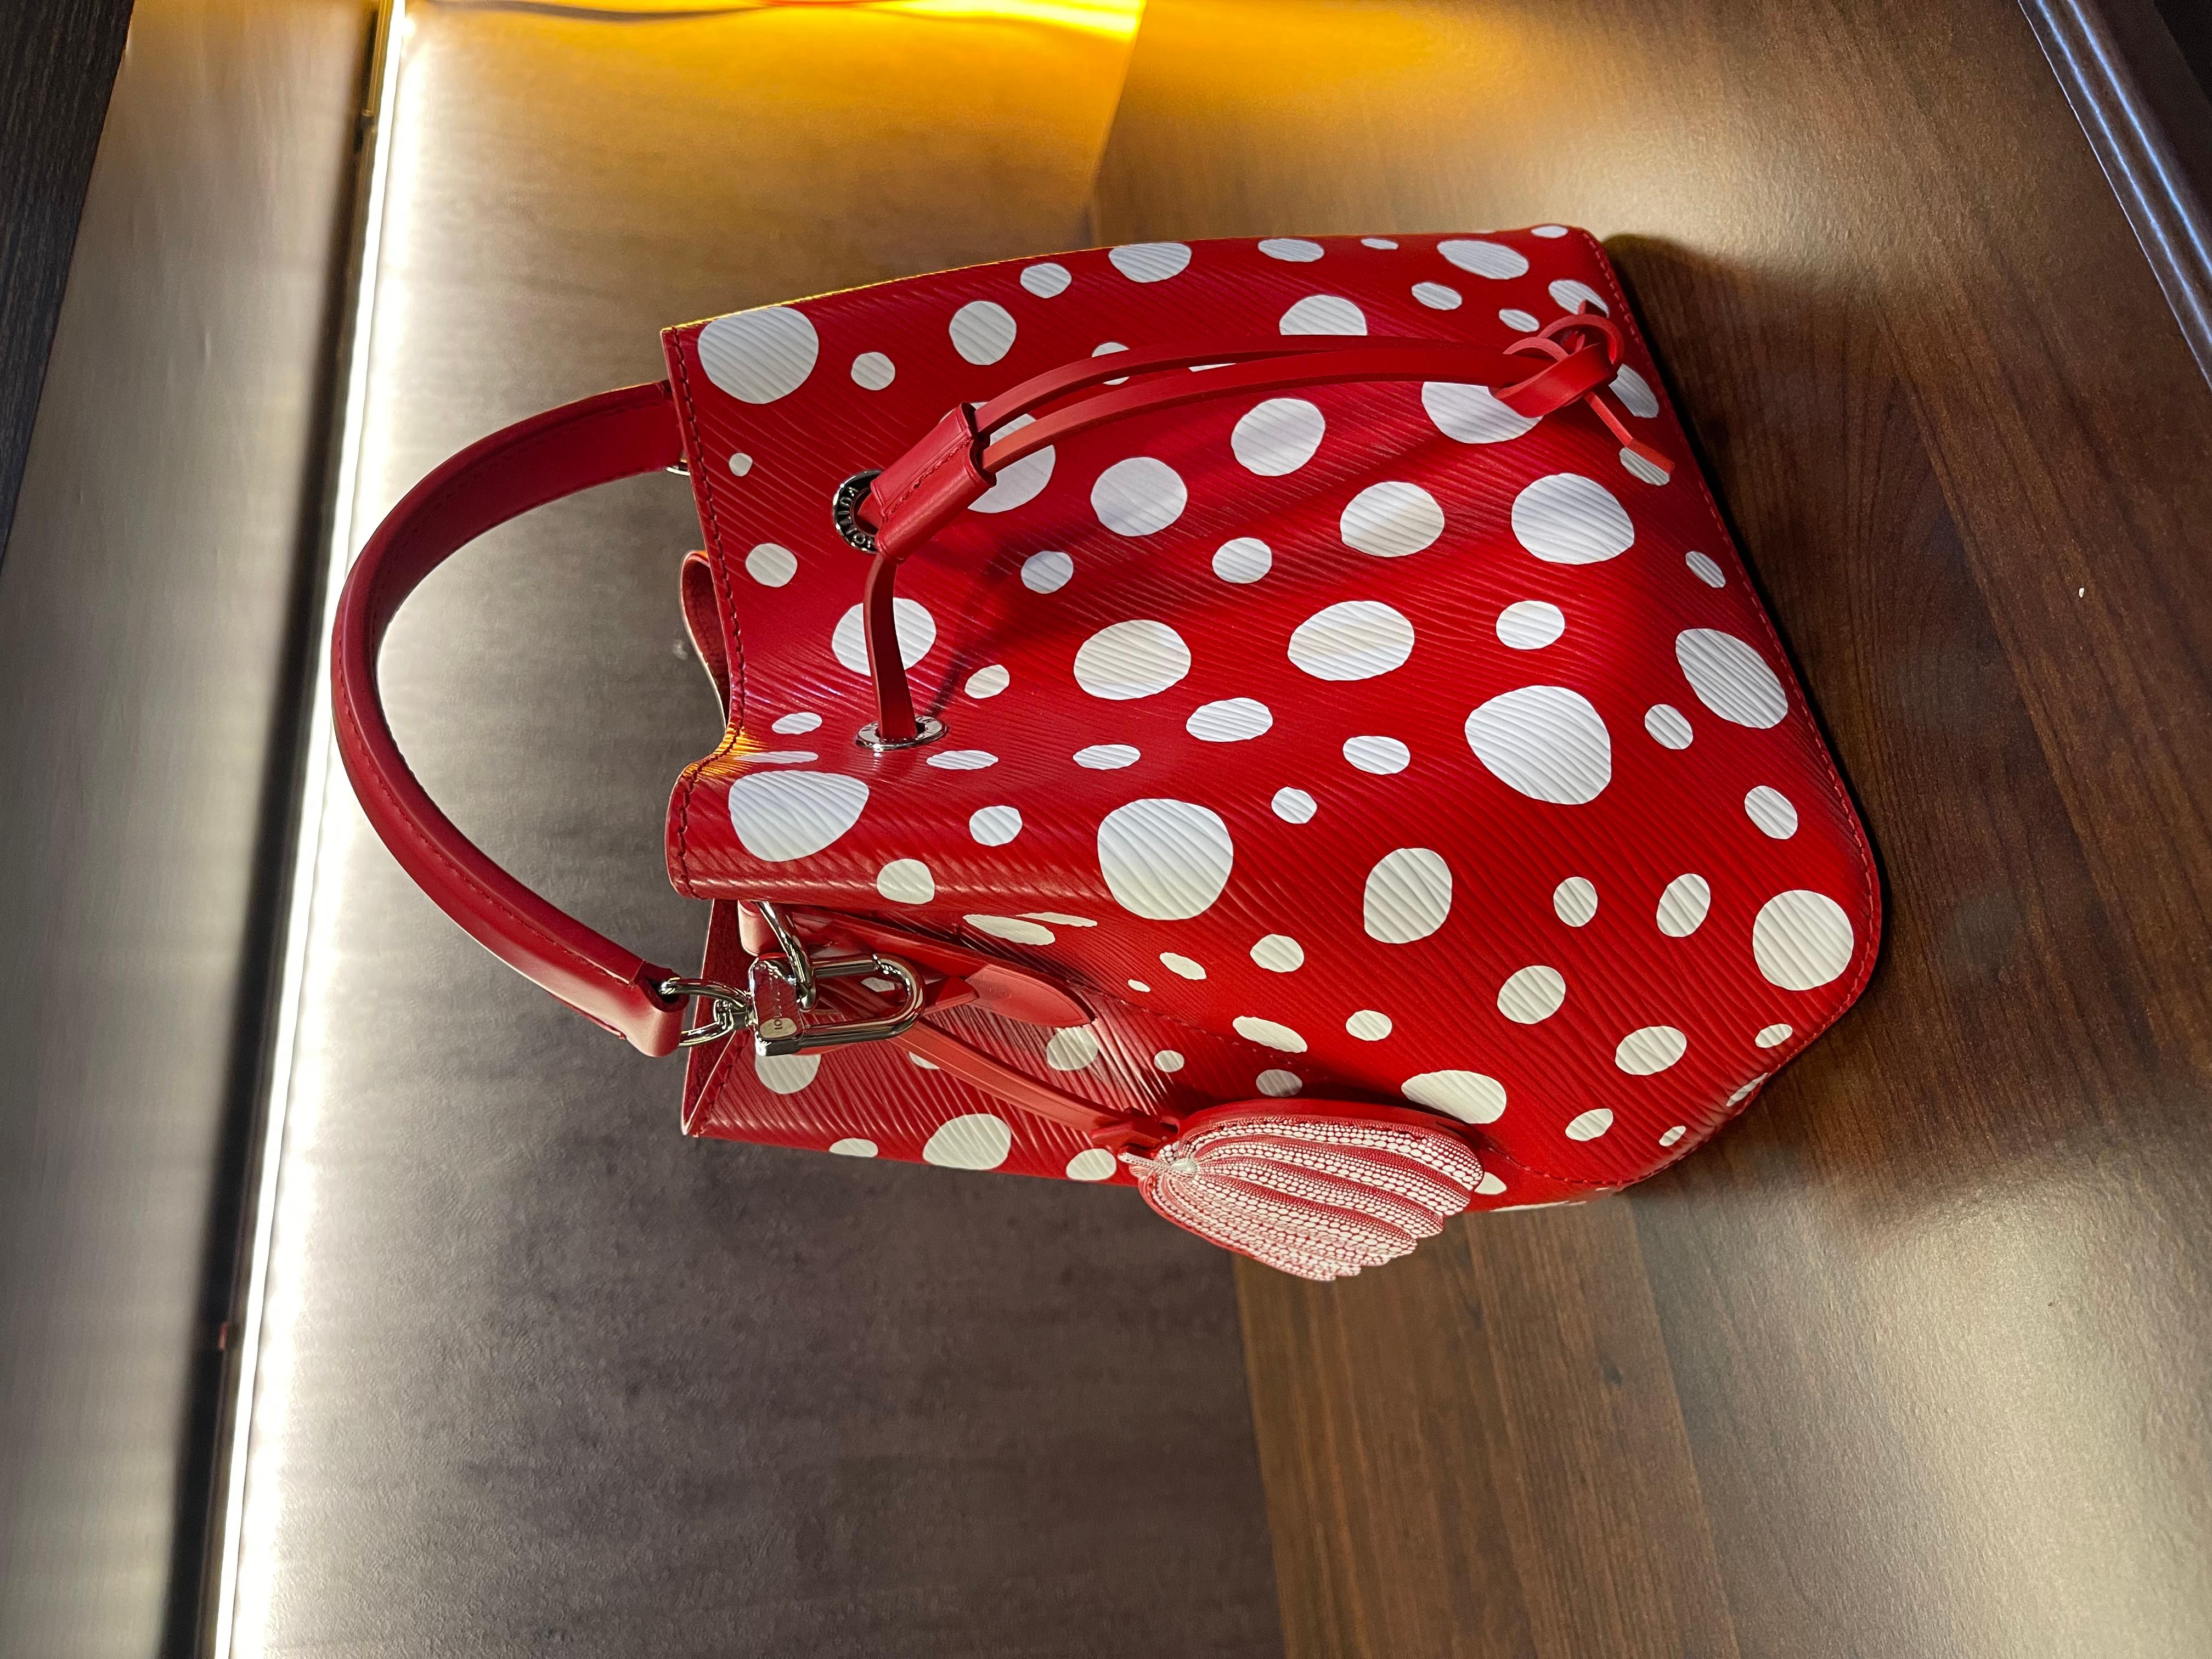 Rare collectible LV collaboration with Yayoi Kusama from the 2023 collection. In brand new condition. Beautiful small bucket bag with cute polkadot and pumpkin tag design.